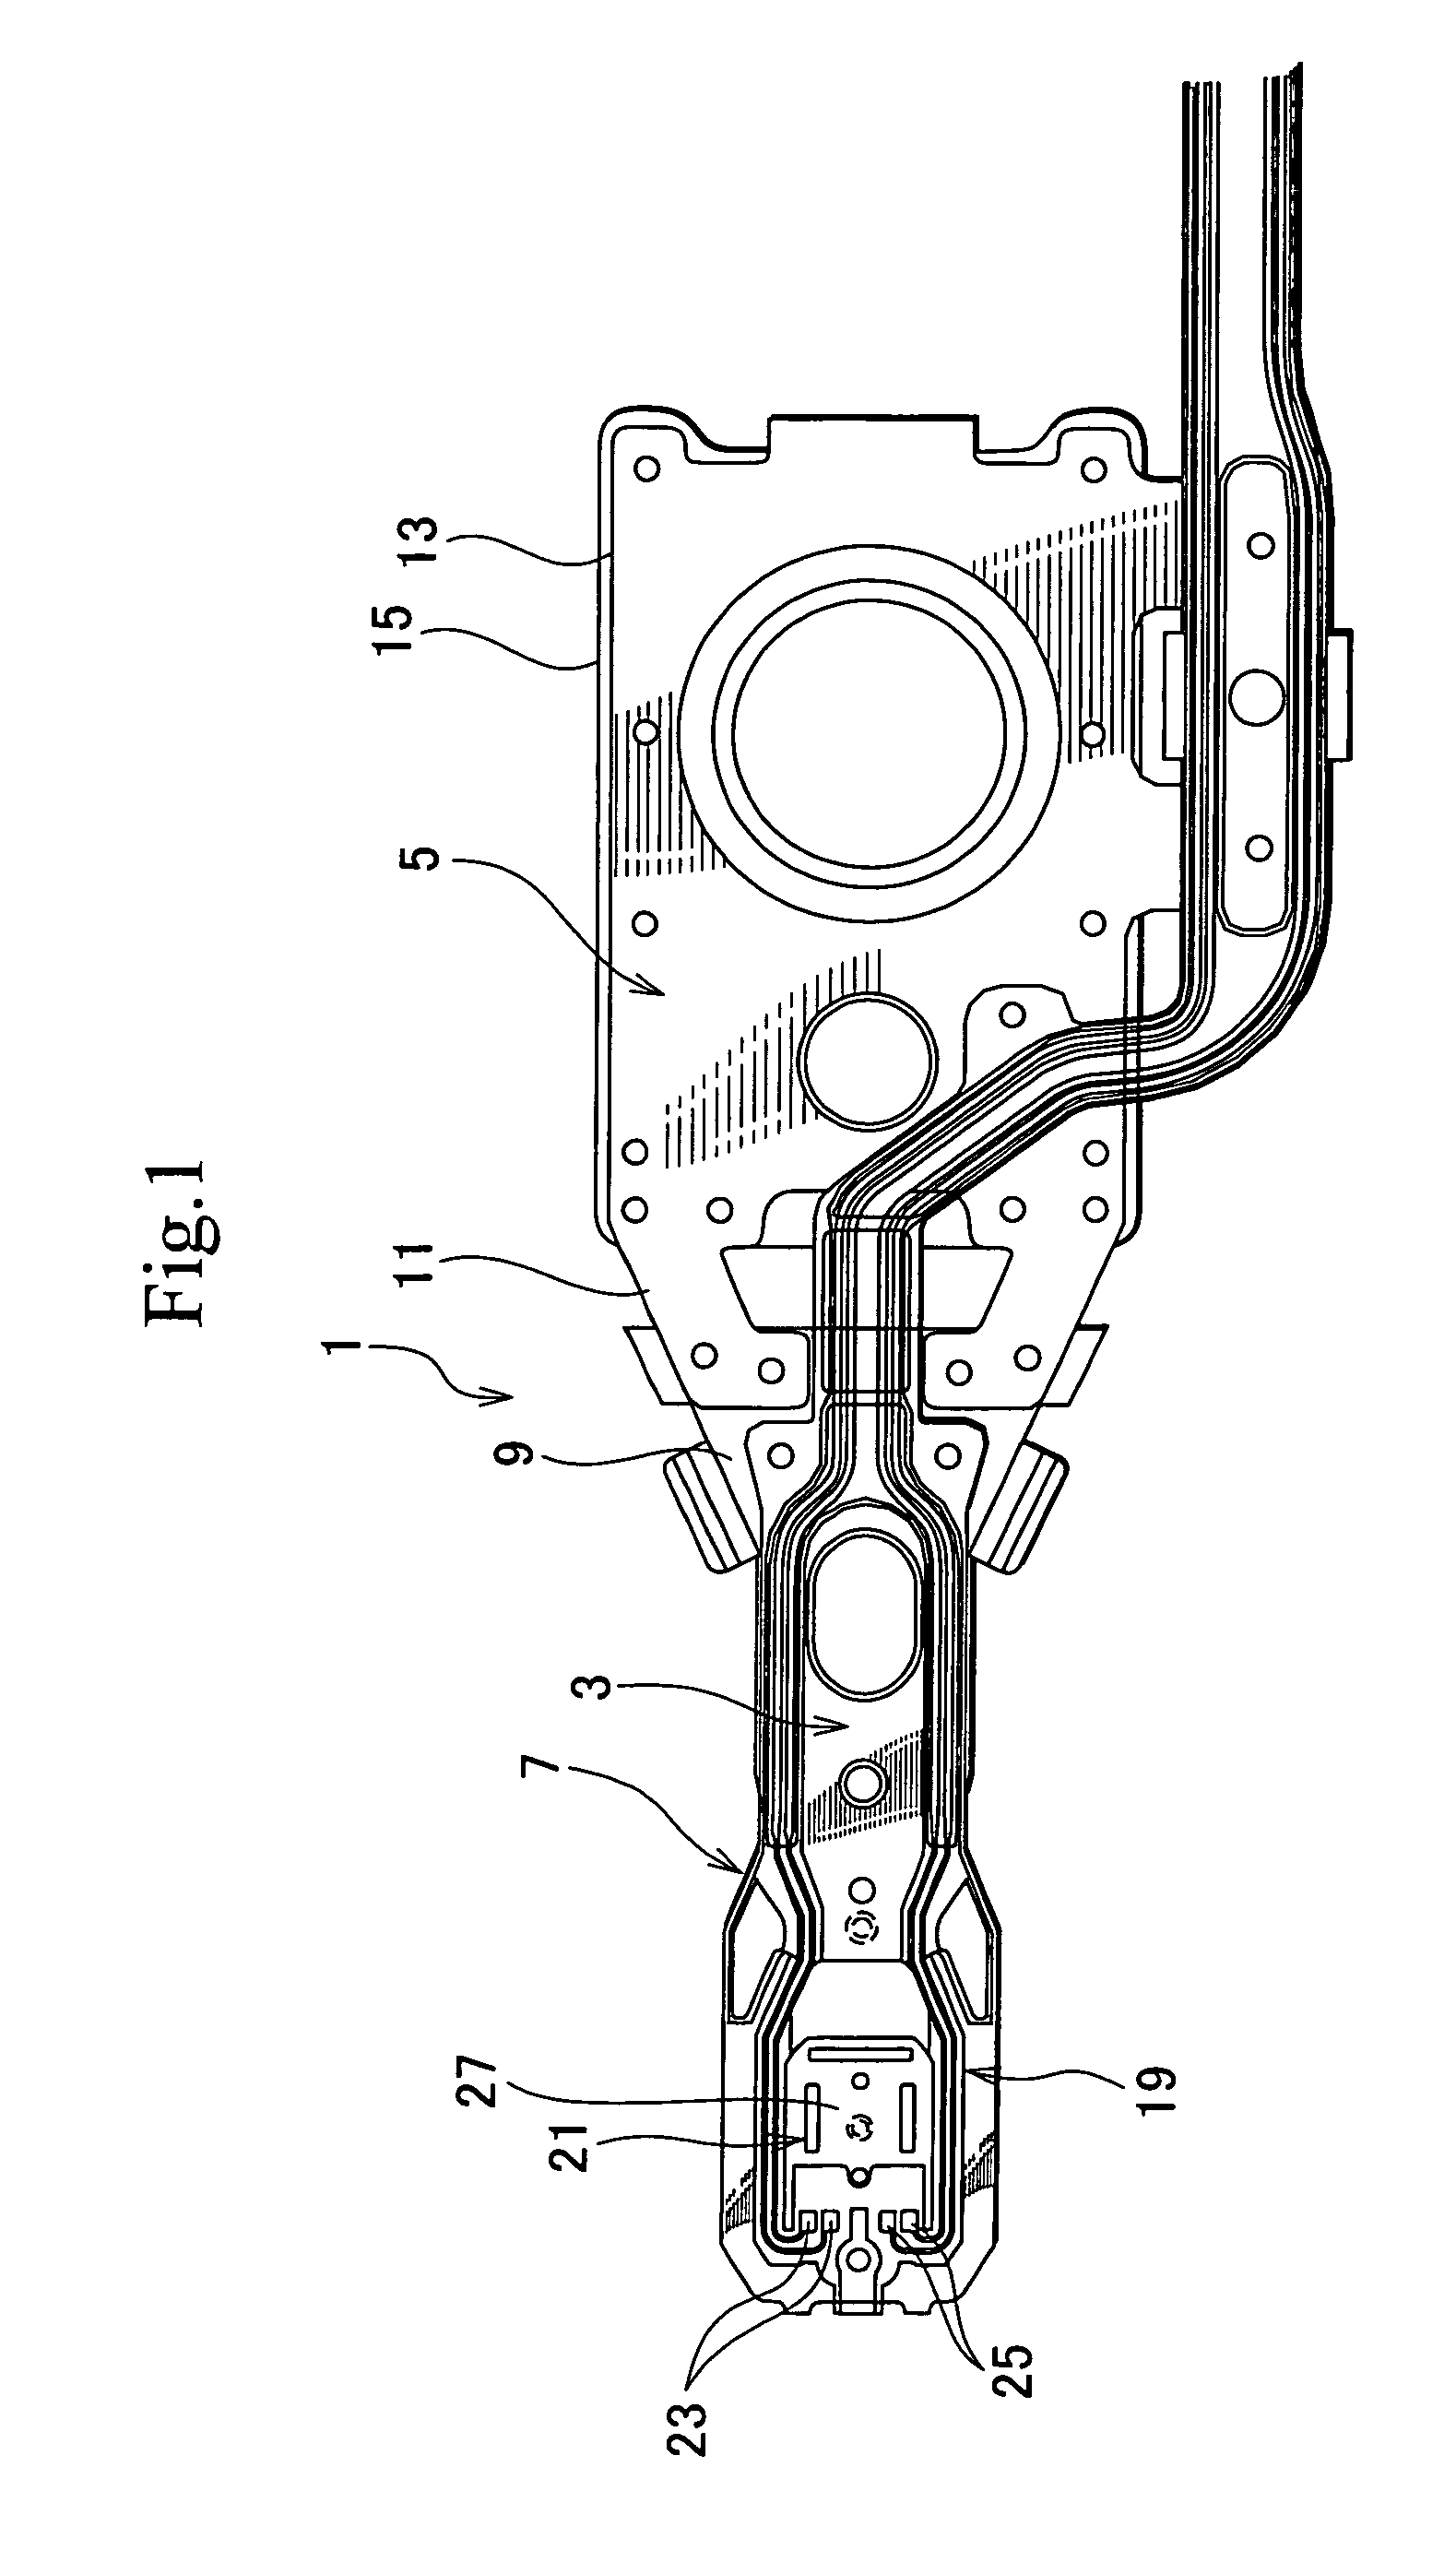 Head suspension having wiring disposed in contact with slightly conductive flexible resin